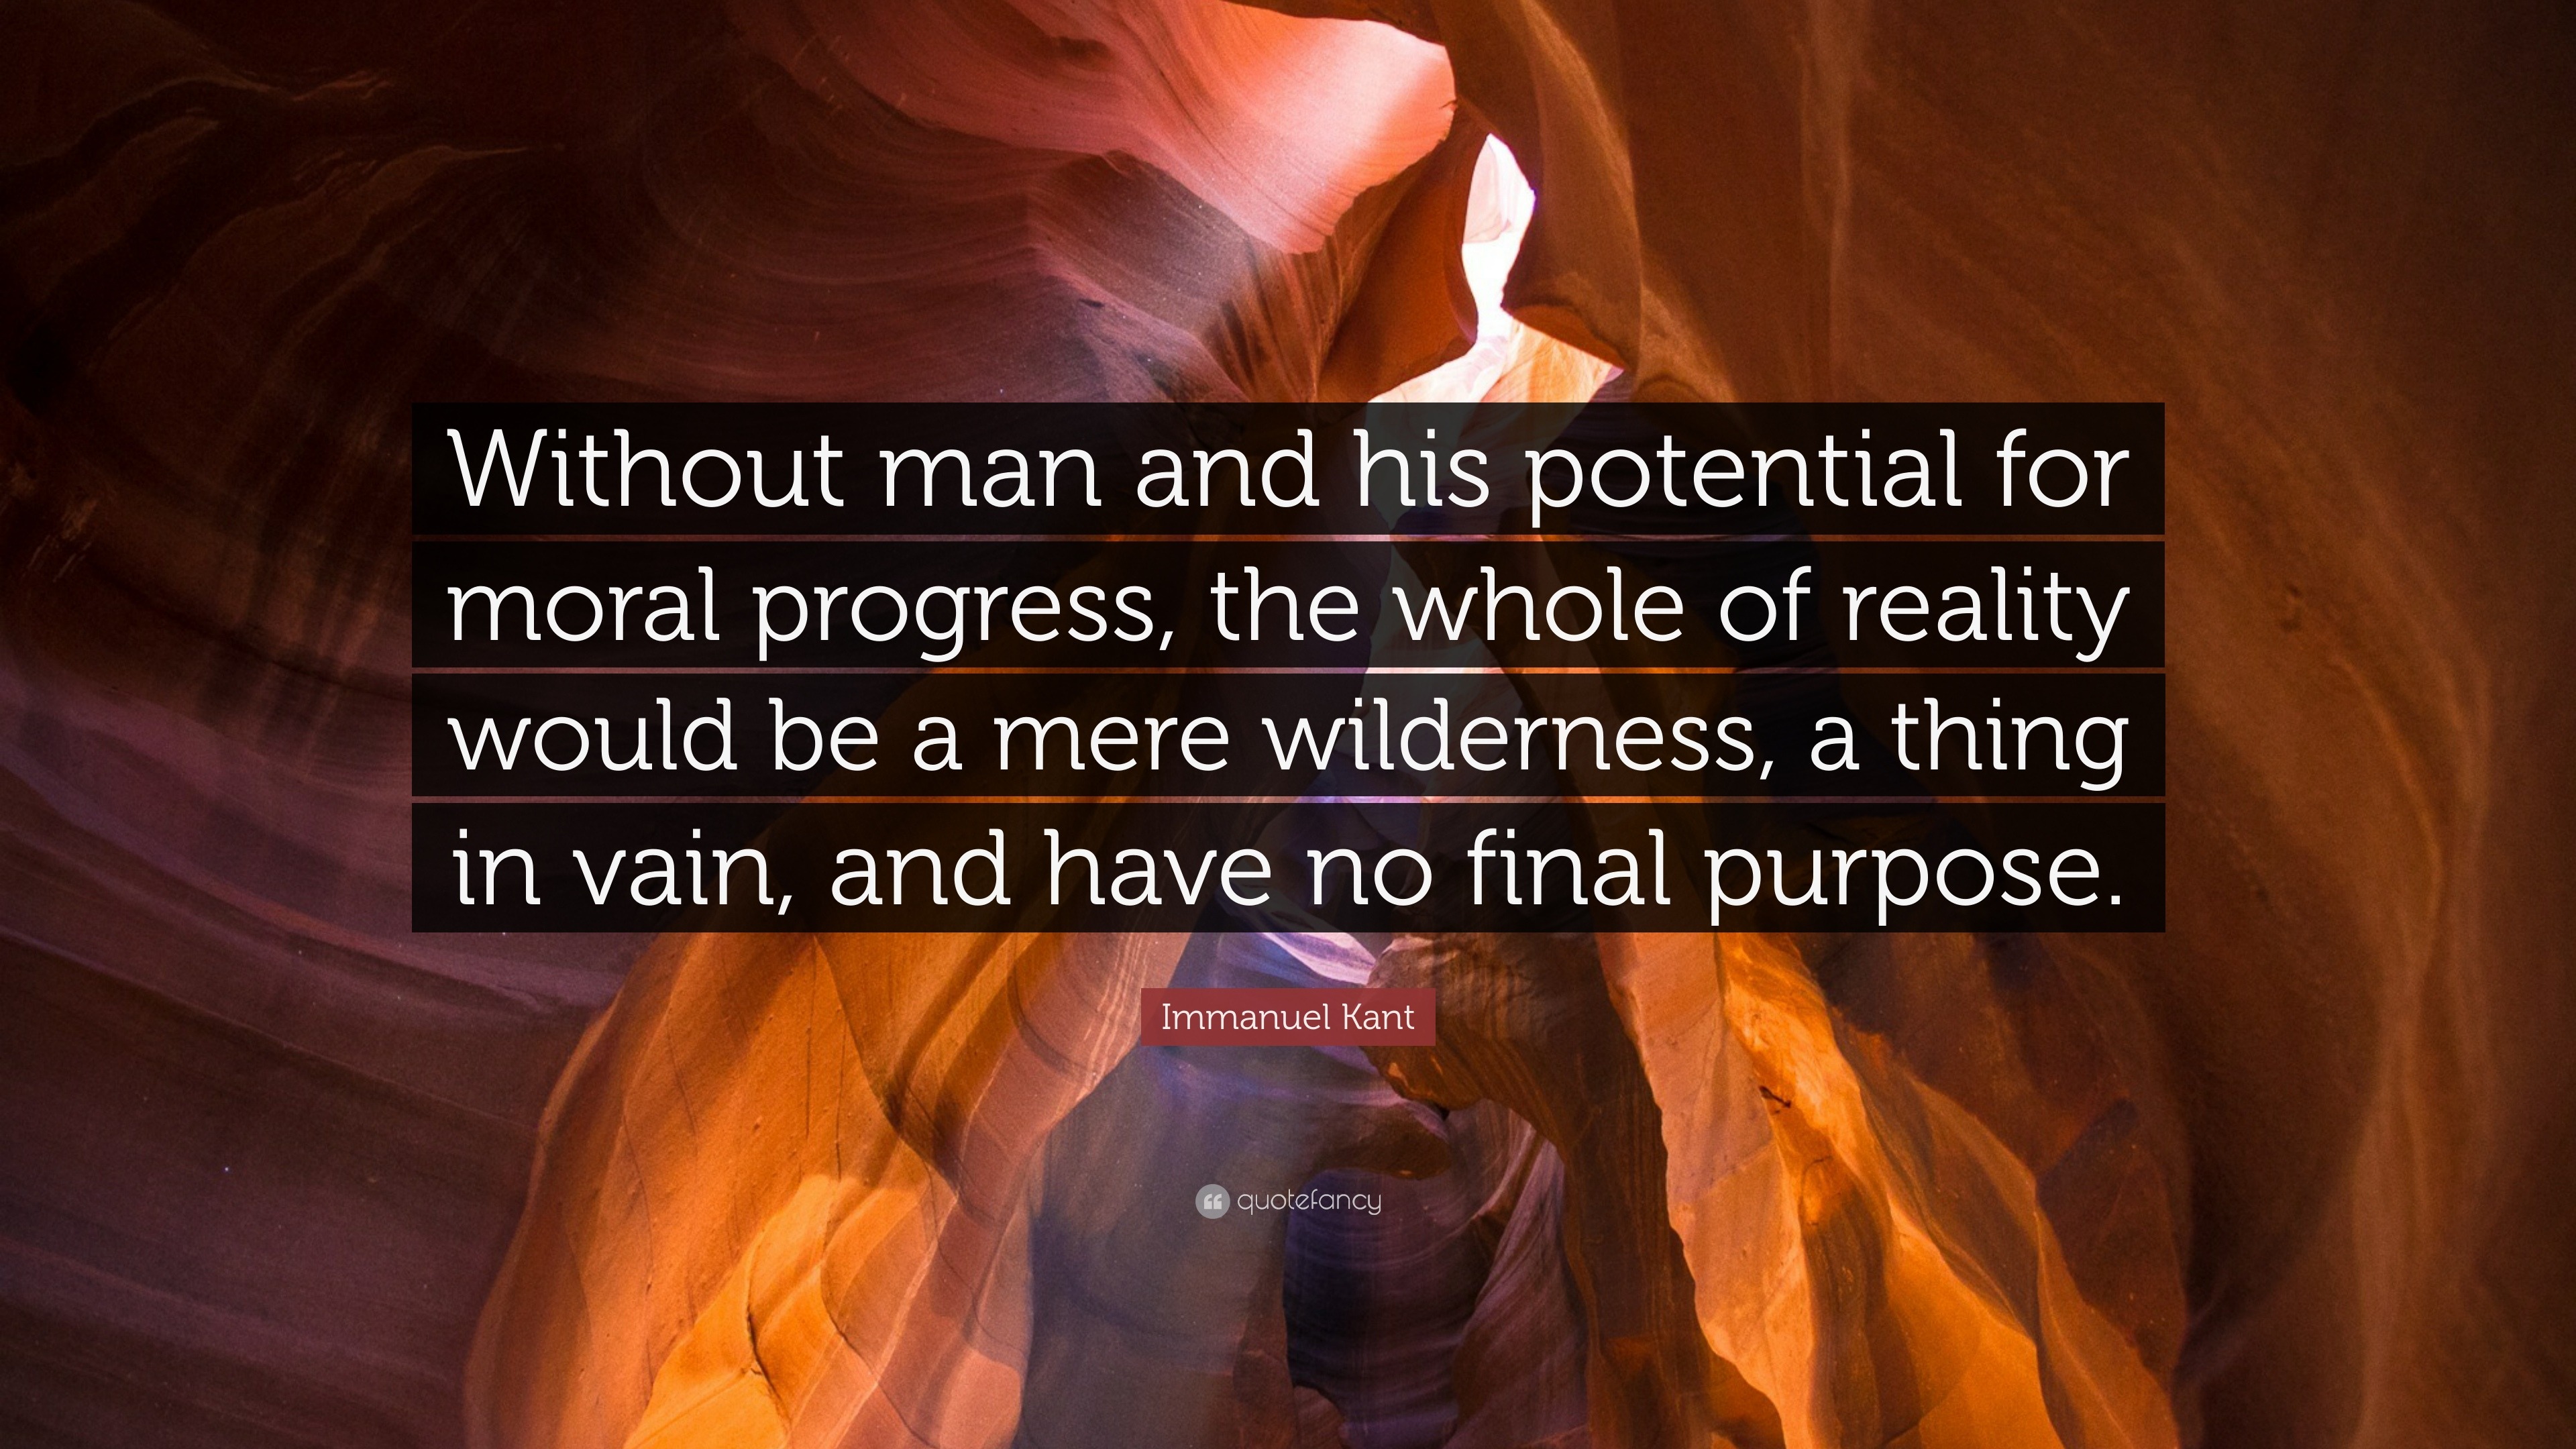 Immanuel Kant Quote: “Without man and his potential for moral progress ...